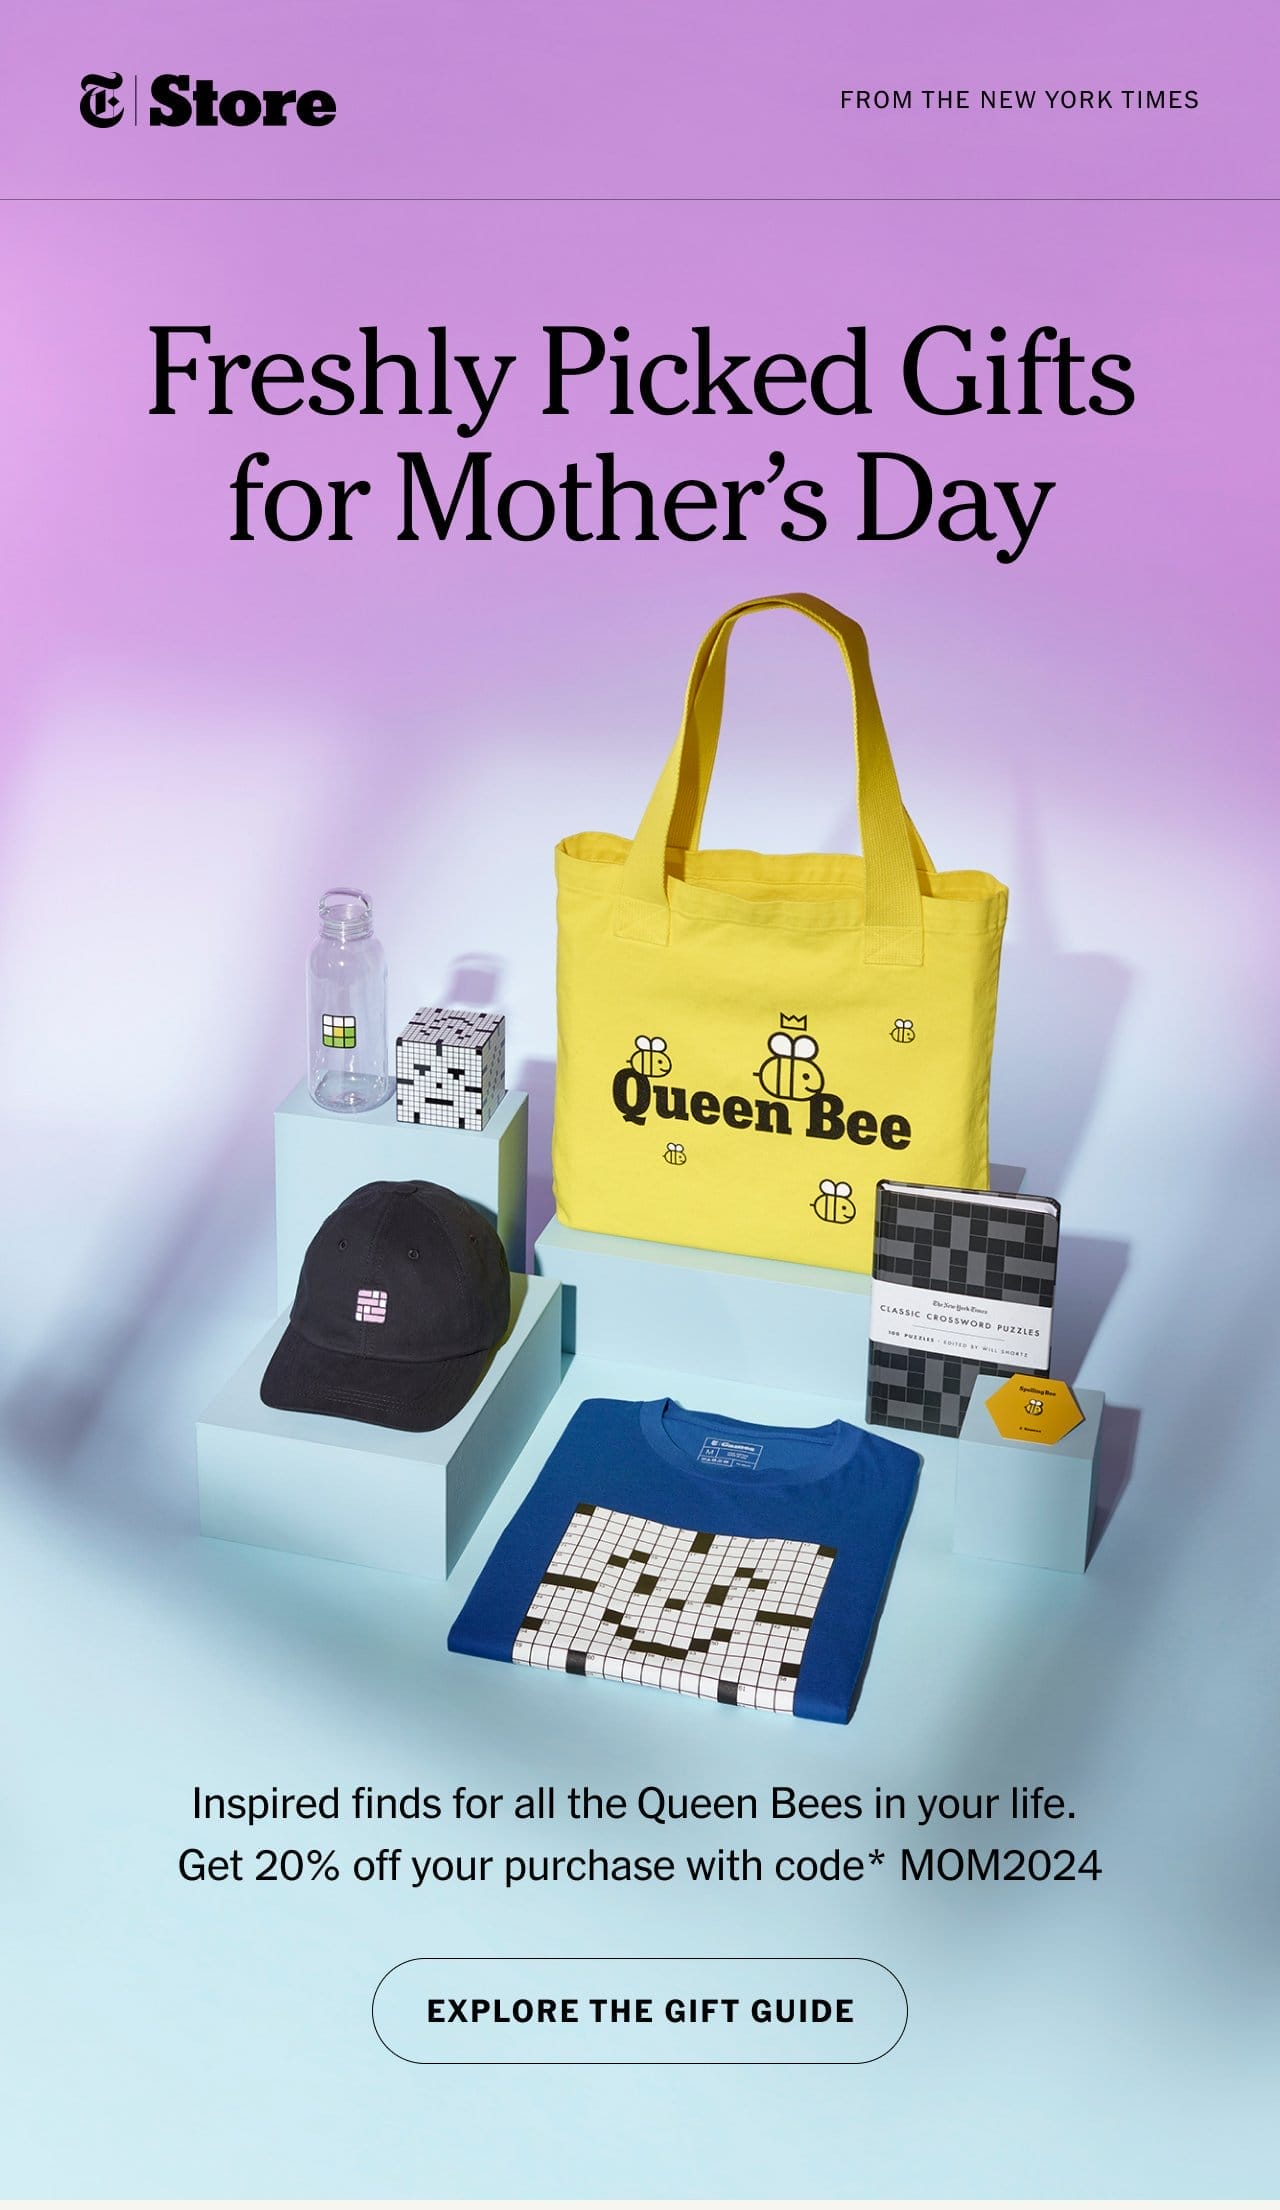 Freshly Picked Gifts for Mother’s Day. Inspired finds for all the Queen Bees in your life.Get 20% off your purchase with code* MOM2024 Explore the Gift Guide